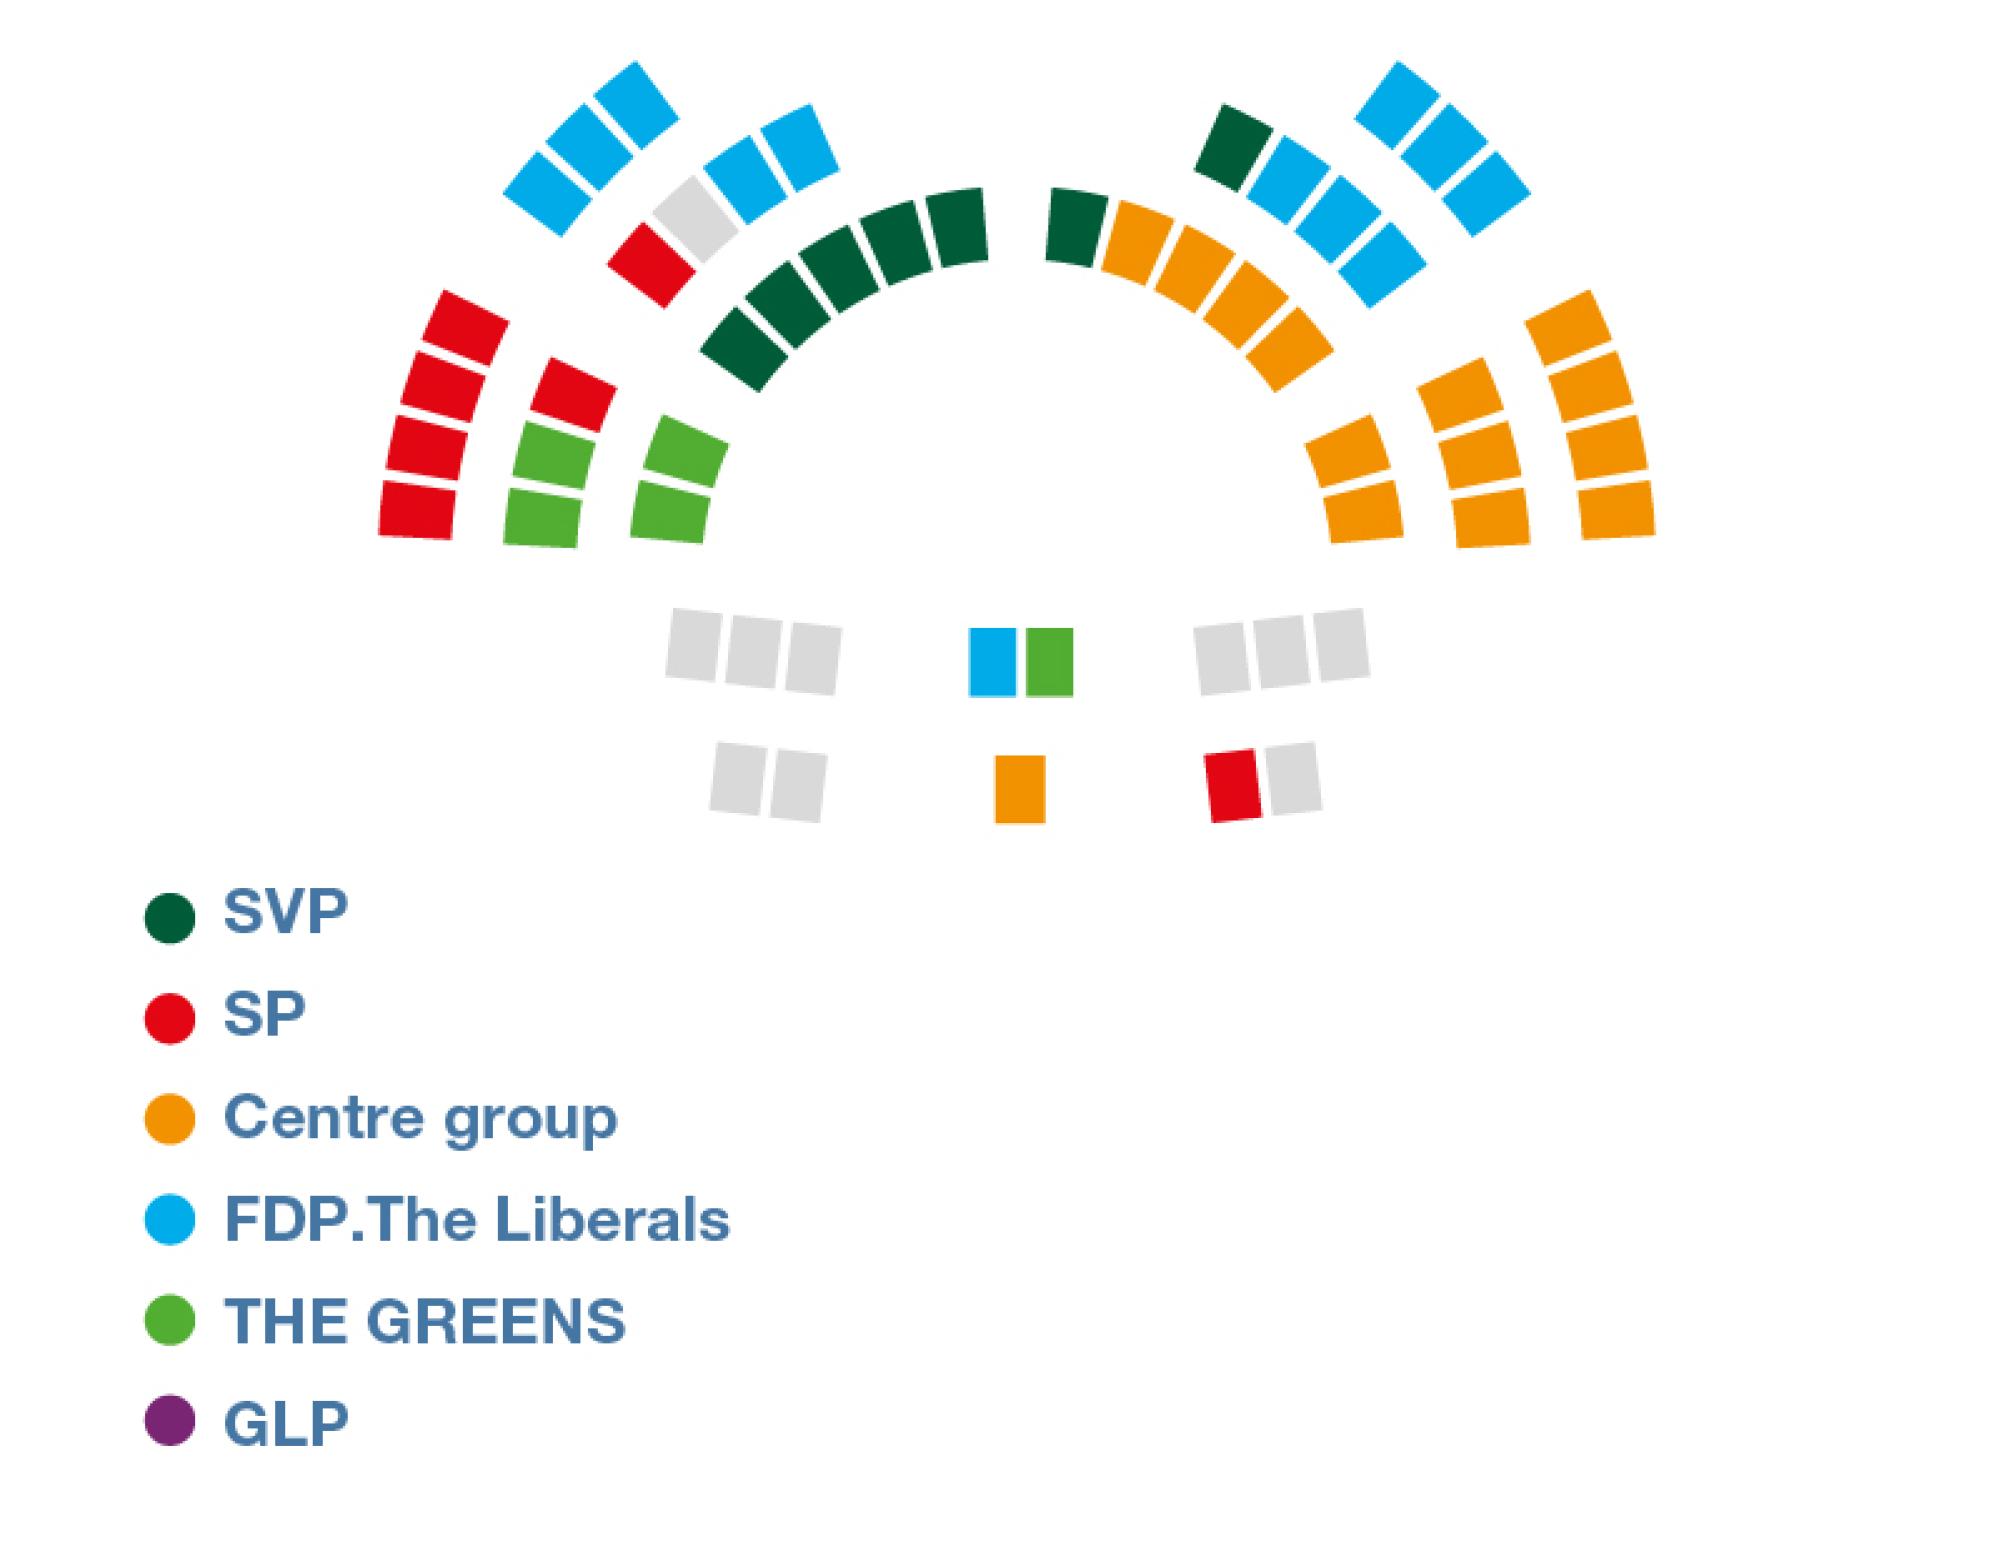 Another diagram shows how the 46 seats of the Council of States are allocated among the five parliamentary groups.